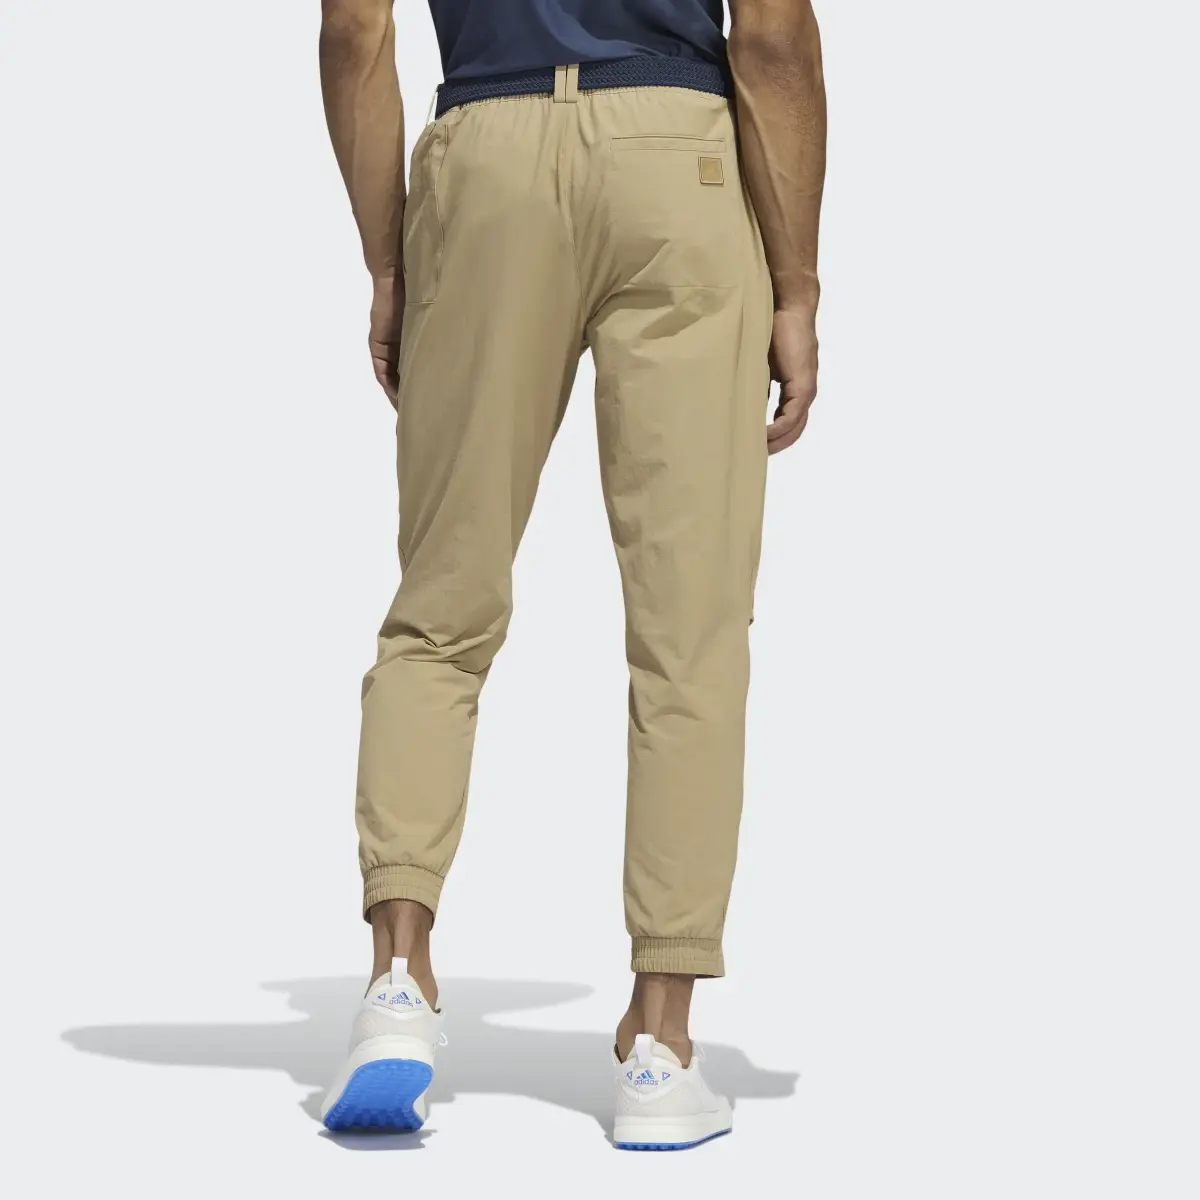 Adidas Go-To Commuter Golf Pants. 2